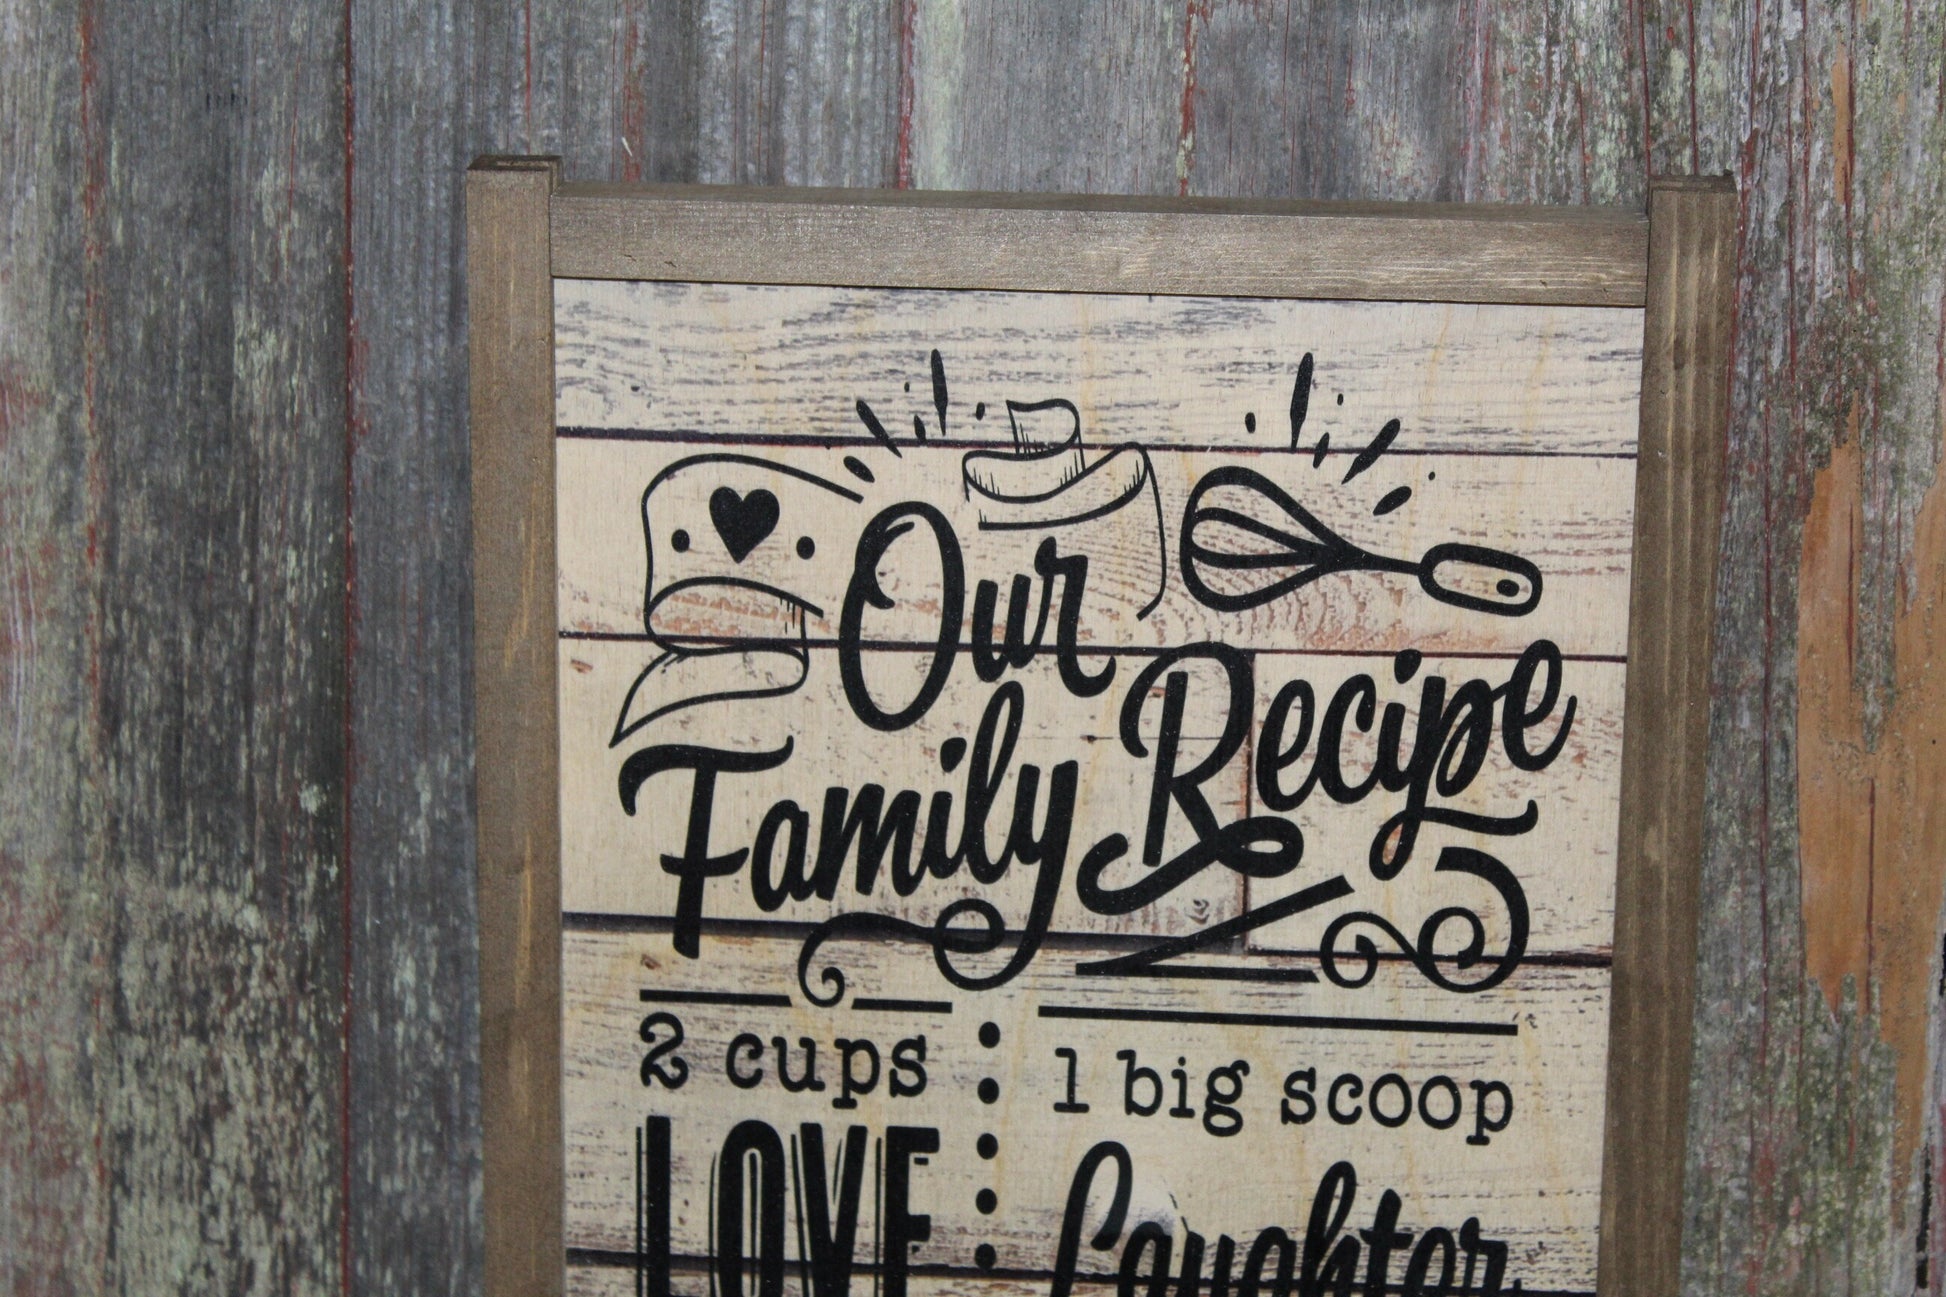 Our Family Rules Wood Sign Shiplap Wall Art Farmhouse Primitive Rustic Text Large Love Laughter Measuring Patience Kindness Recipe Text